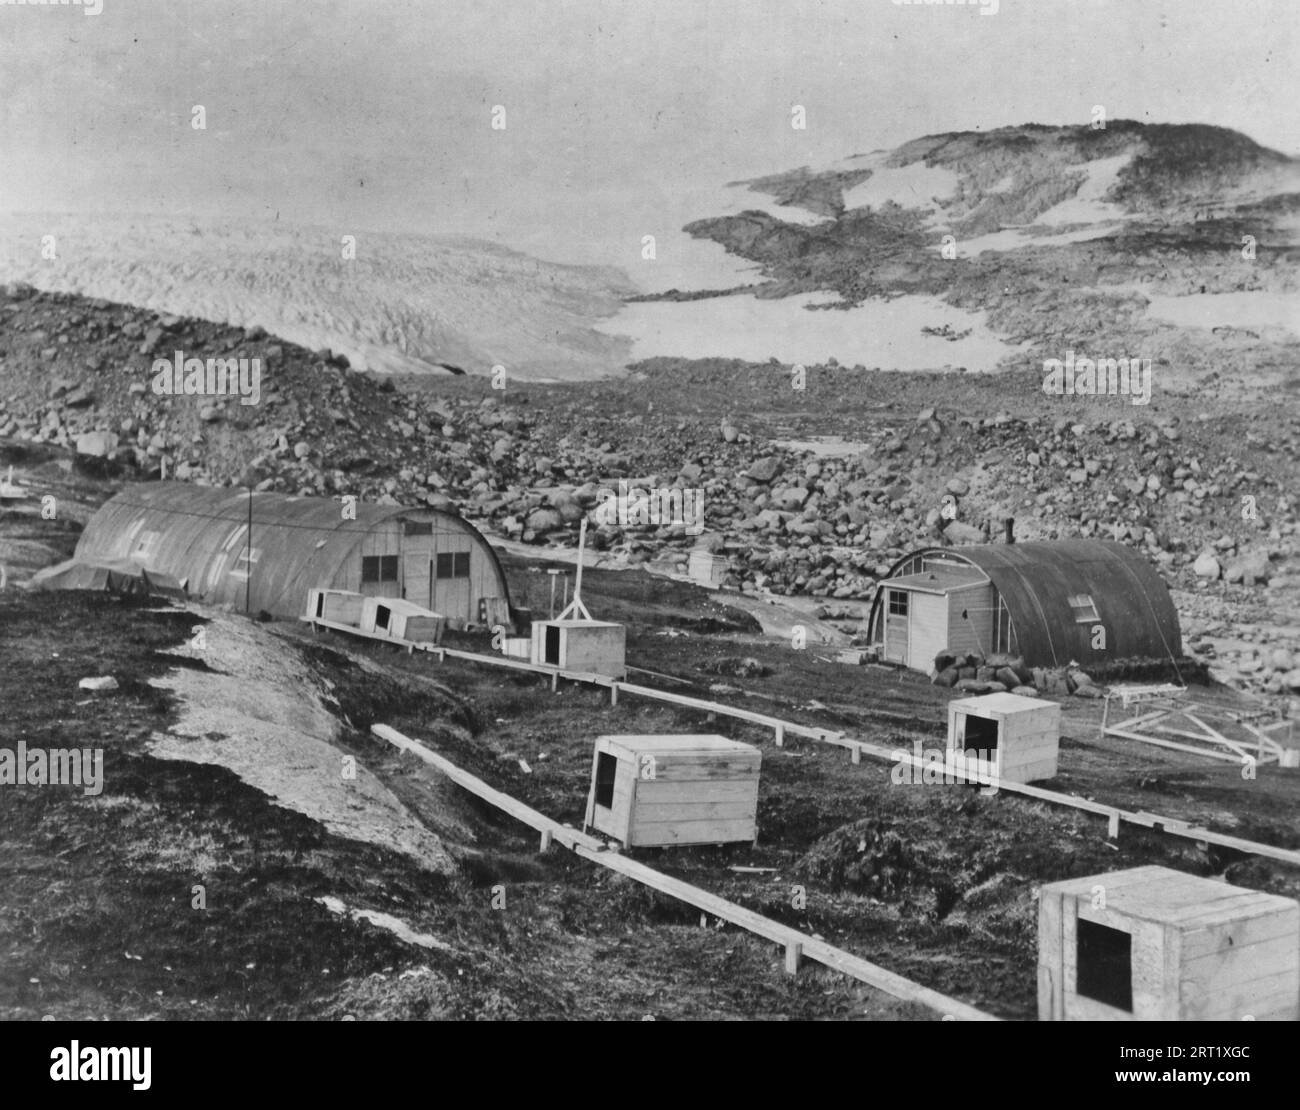 View Of Cape Adelaer, Greenland. Warehouse On The Left And On The Right Is Rescue House Of 1943-1944 Bicd Installation. In The Foreground May Be Seen Doghouses. Water For Camp Is Normally Obtained From Stream Running To Right Of Rescue House - 1947 Stock Photo